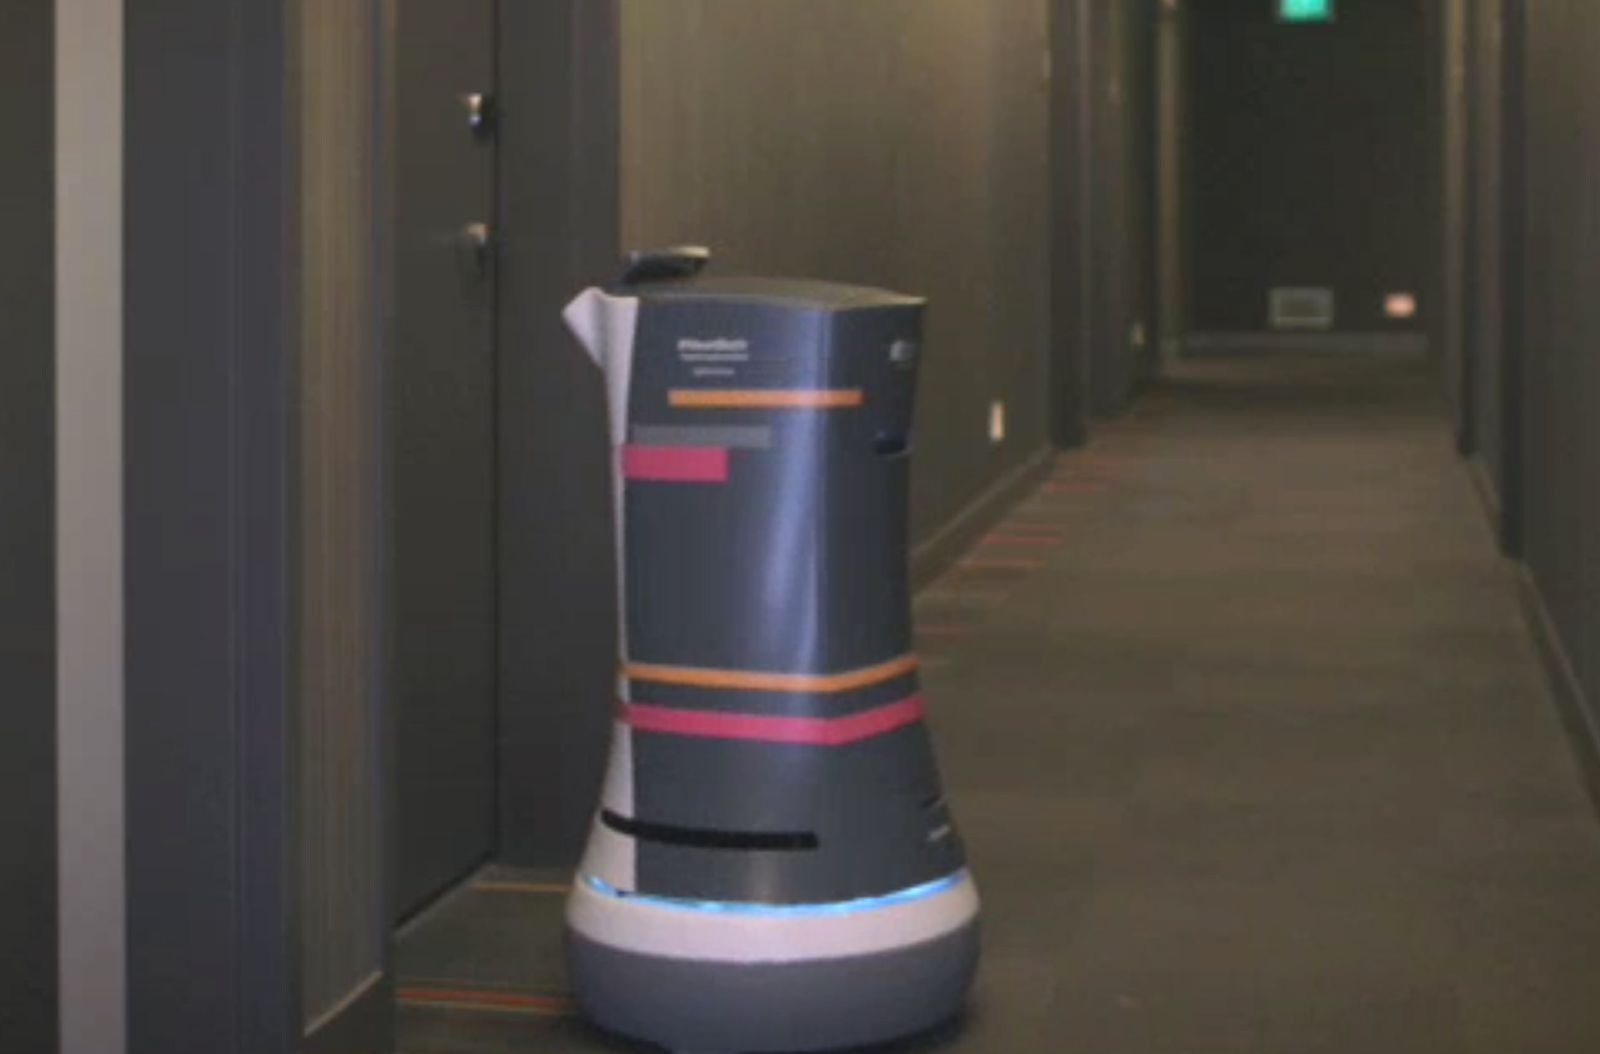 service robots are becoming a thing k5 and oshbot will help you keep watch find a hammer image 2